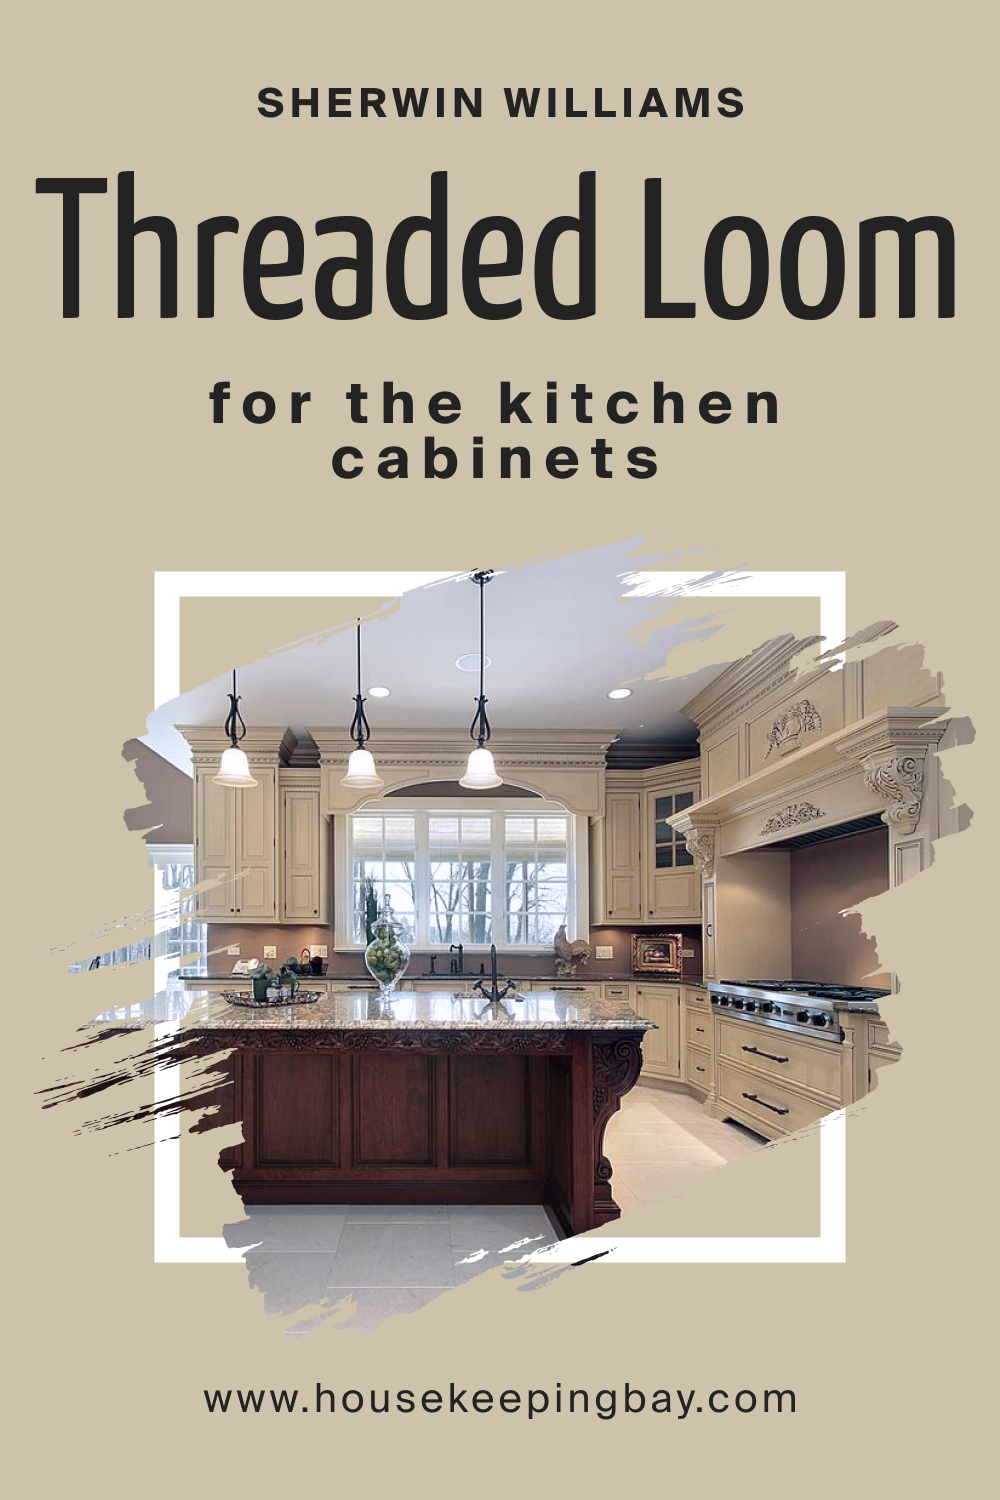 Sherwin Williams. SW 9512 Threaded Loom For the Kitchen Cabinets